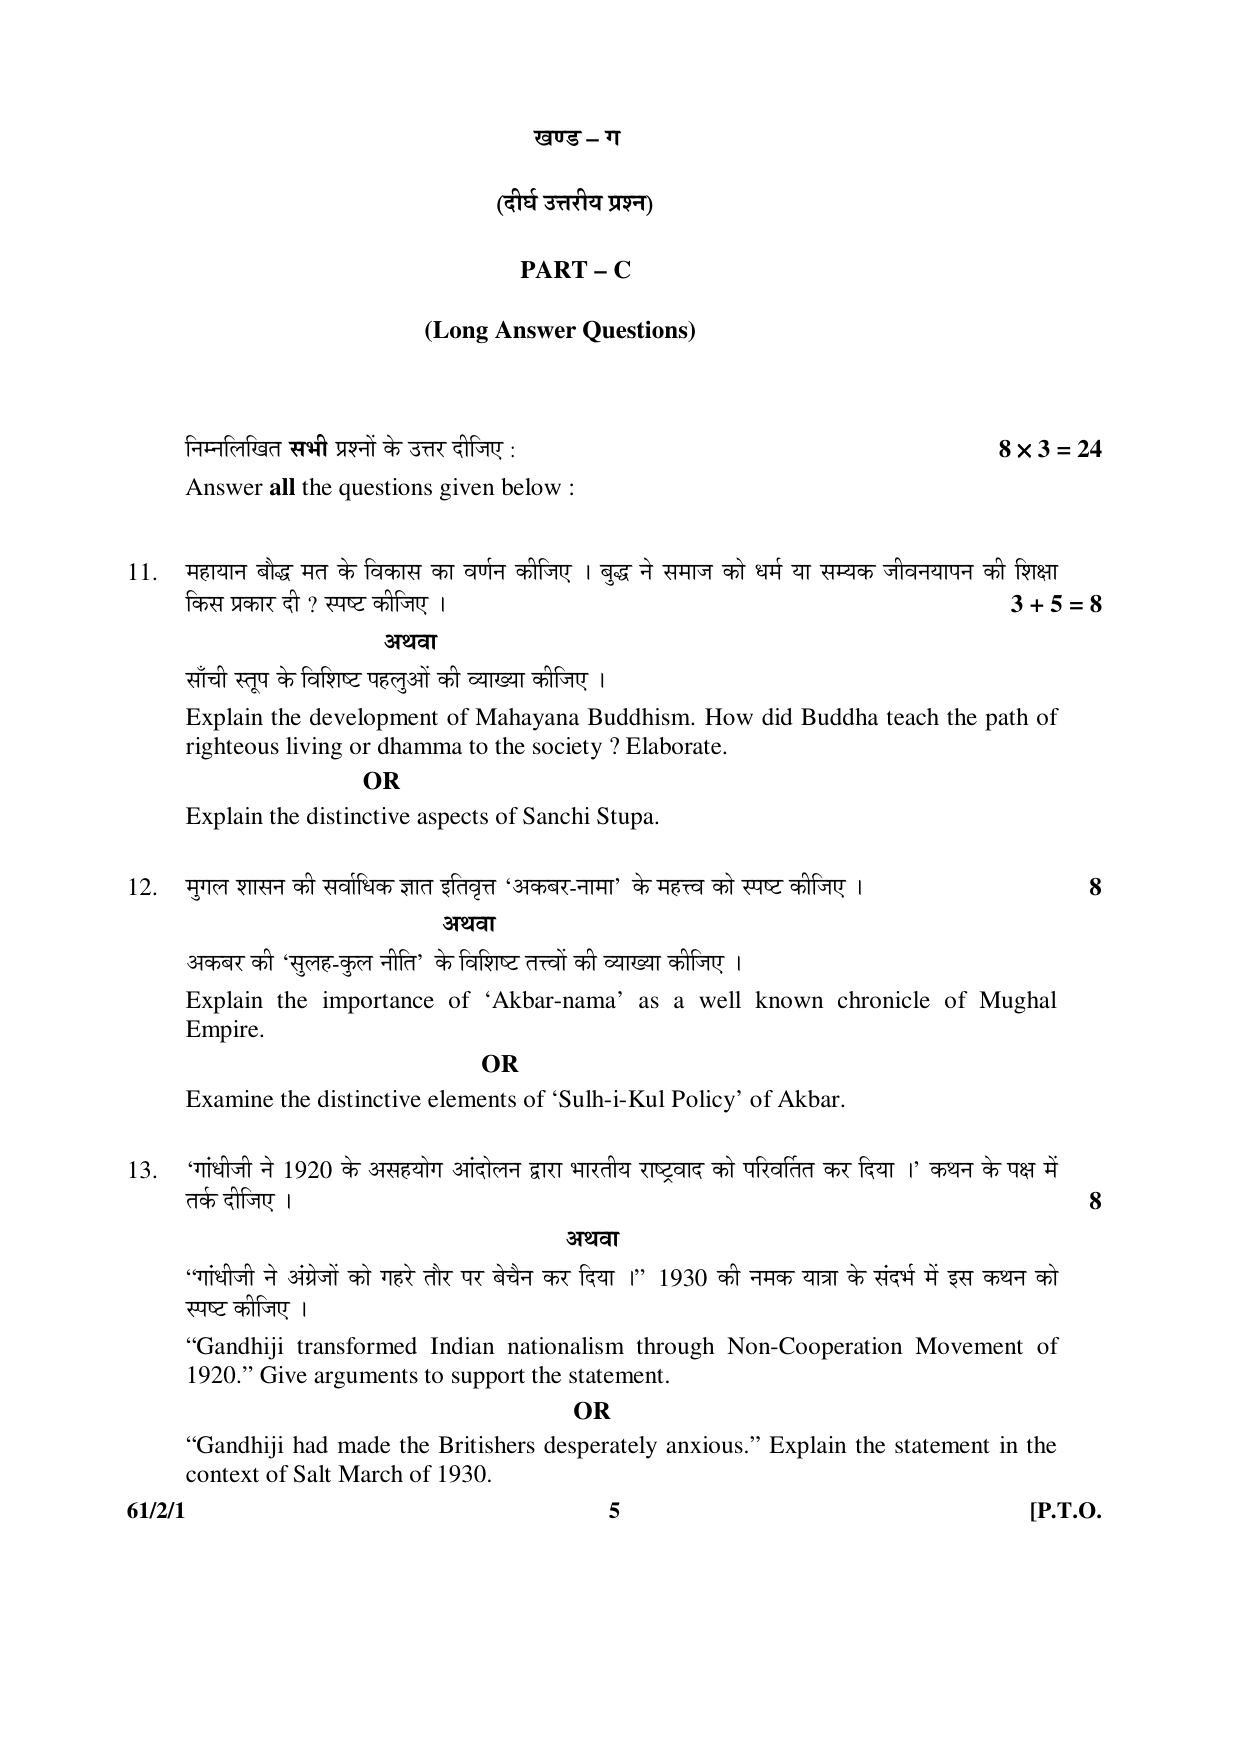 CBSE Class 12 61-2-1 History 2016 Question Paper - Page 5